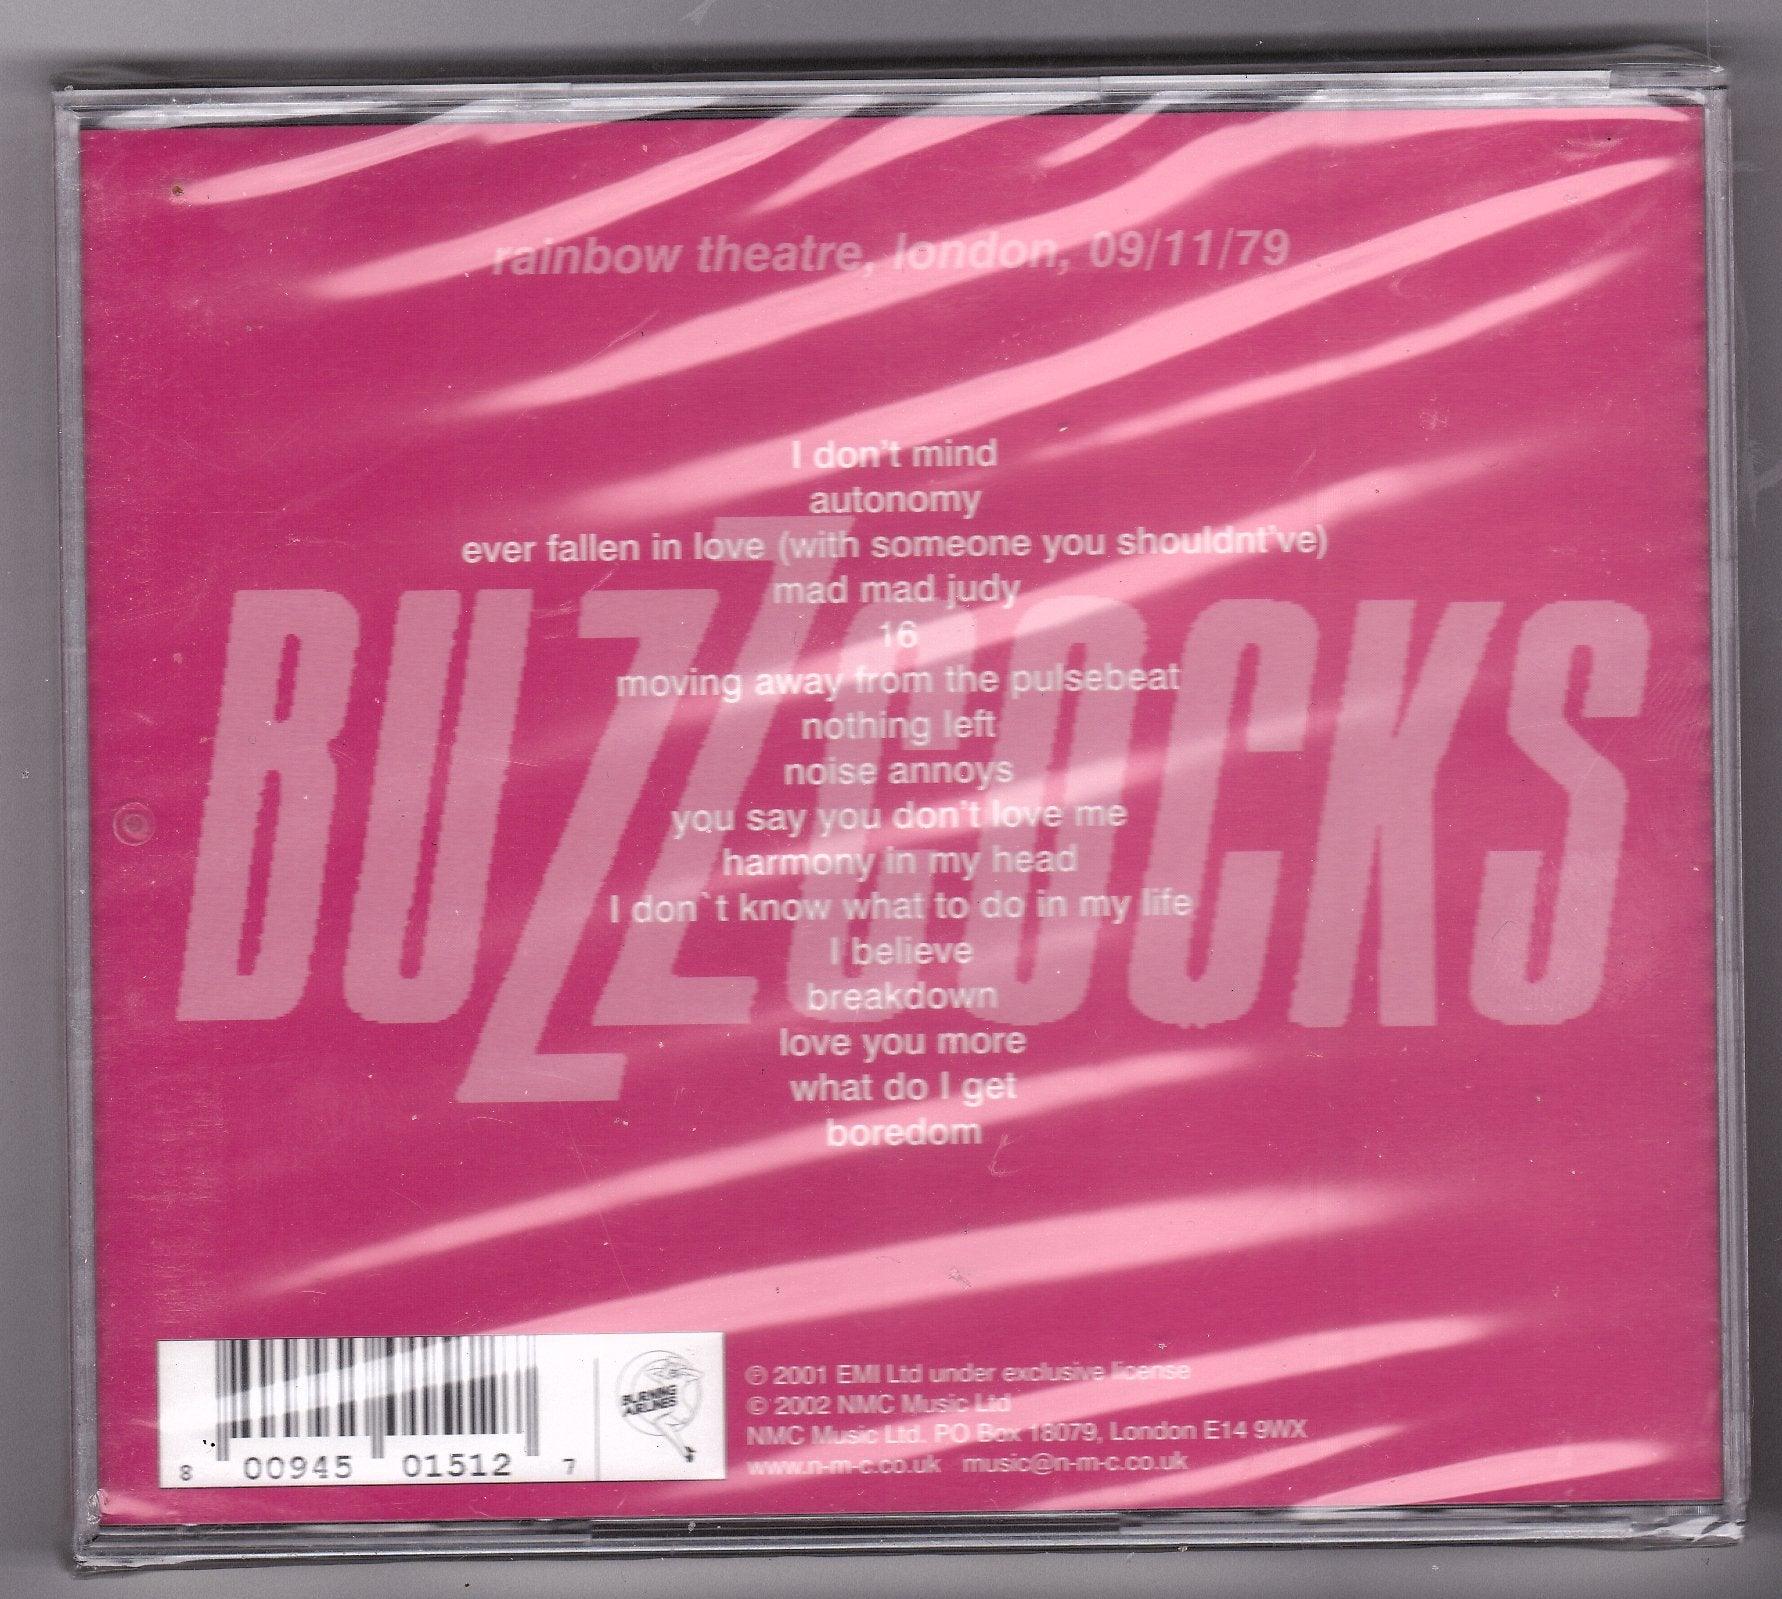 Buzzcocks Live Tension Silver Jubilee Limited Edition Punk CD 2002